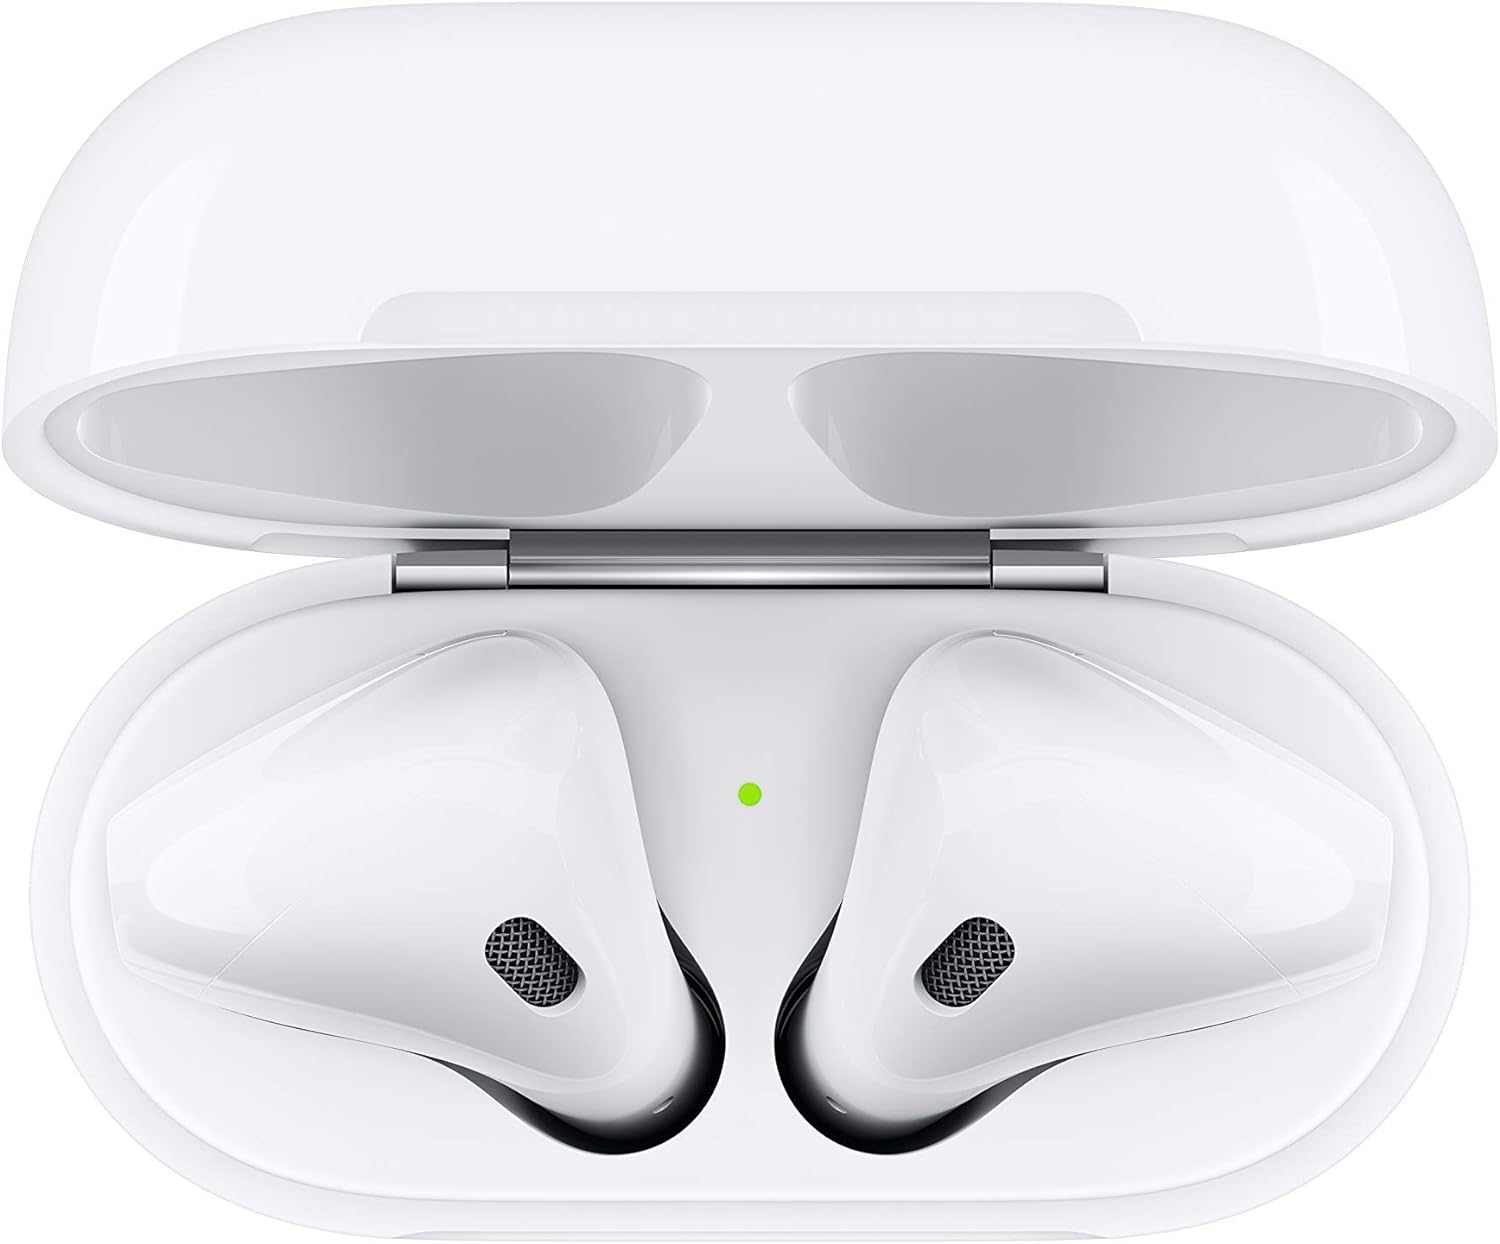 Apple AirPods - White, Say Hey Siri for instant access and eco-friendly packaging. 0190199098565